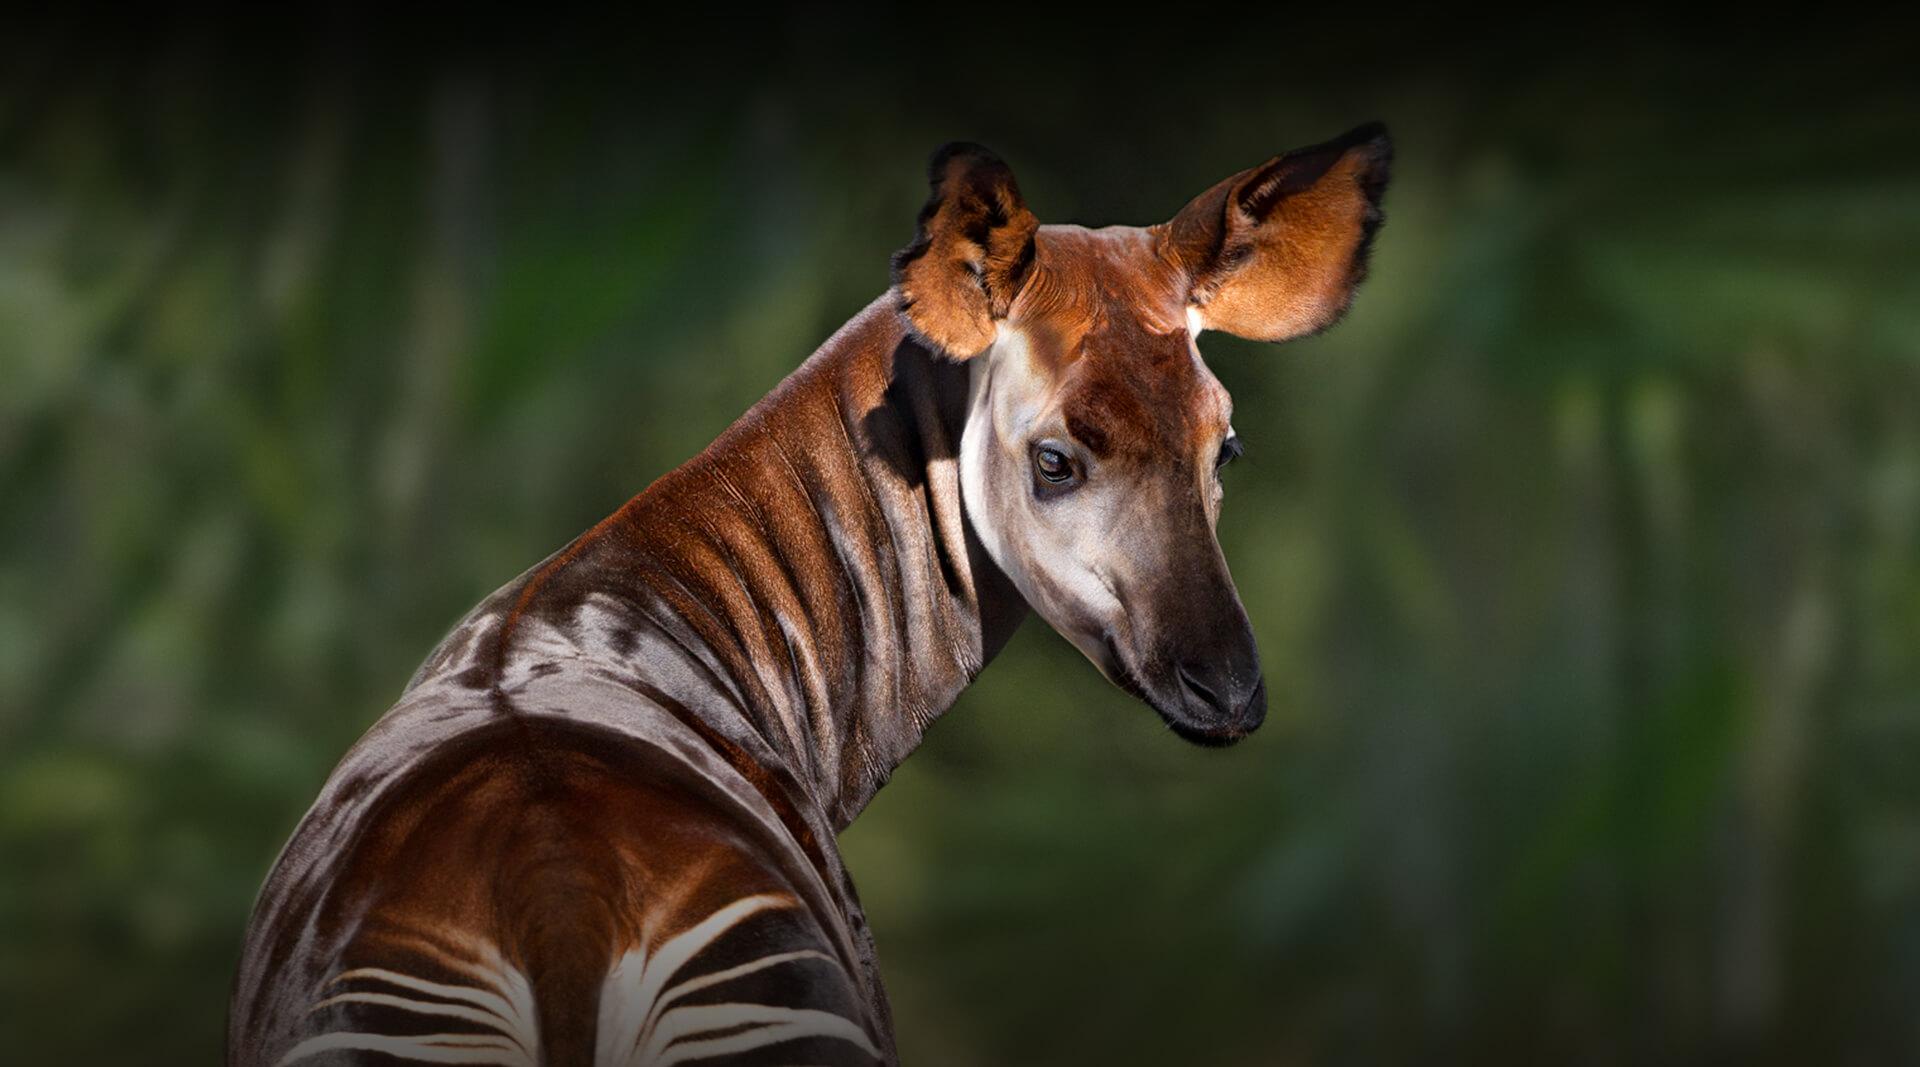 Okapi with view of striped behind.